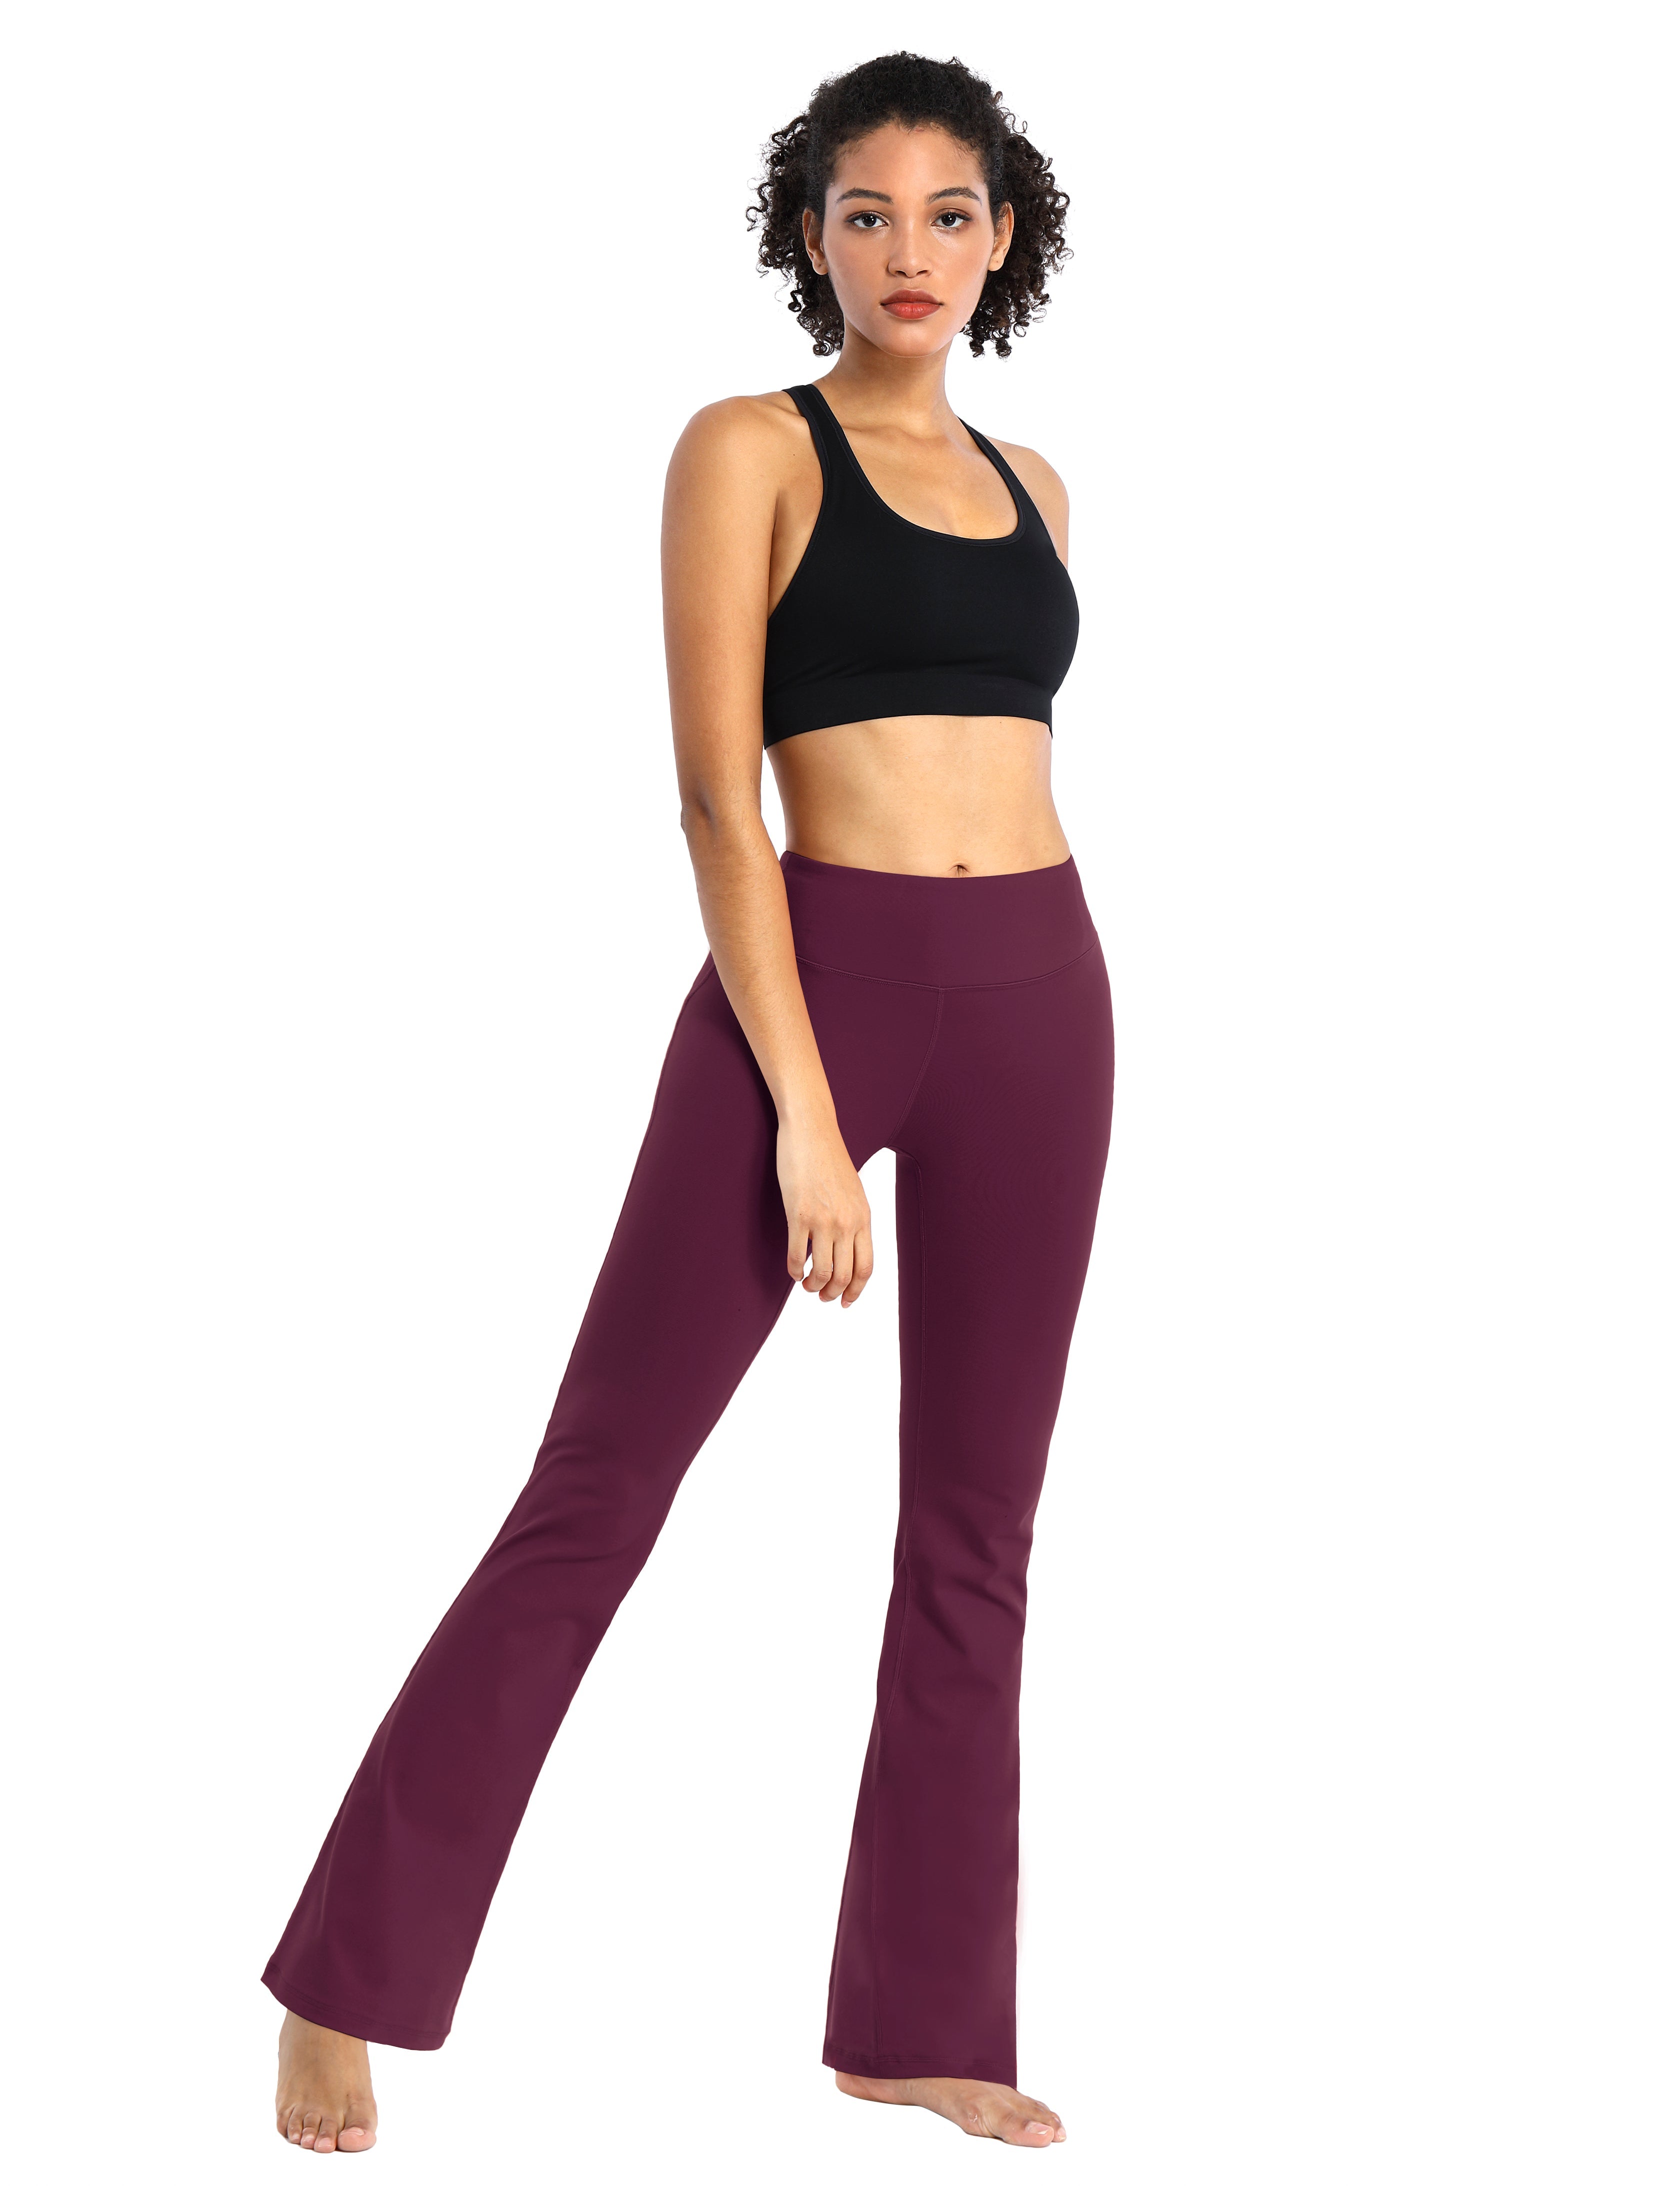 Cotton Nylon Bootcut Leggings grapevine 87%Nylon/13%Spandex (Super soft, cotton feel , 280gsm) Fabric doesn't attract lint easily 4-way stretch No see-through Moisture-wicking Inner pocket Four lengths